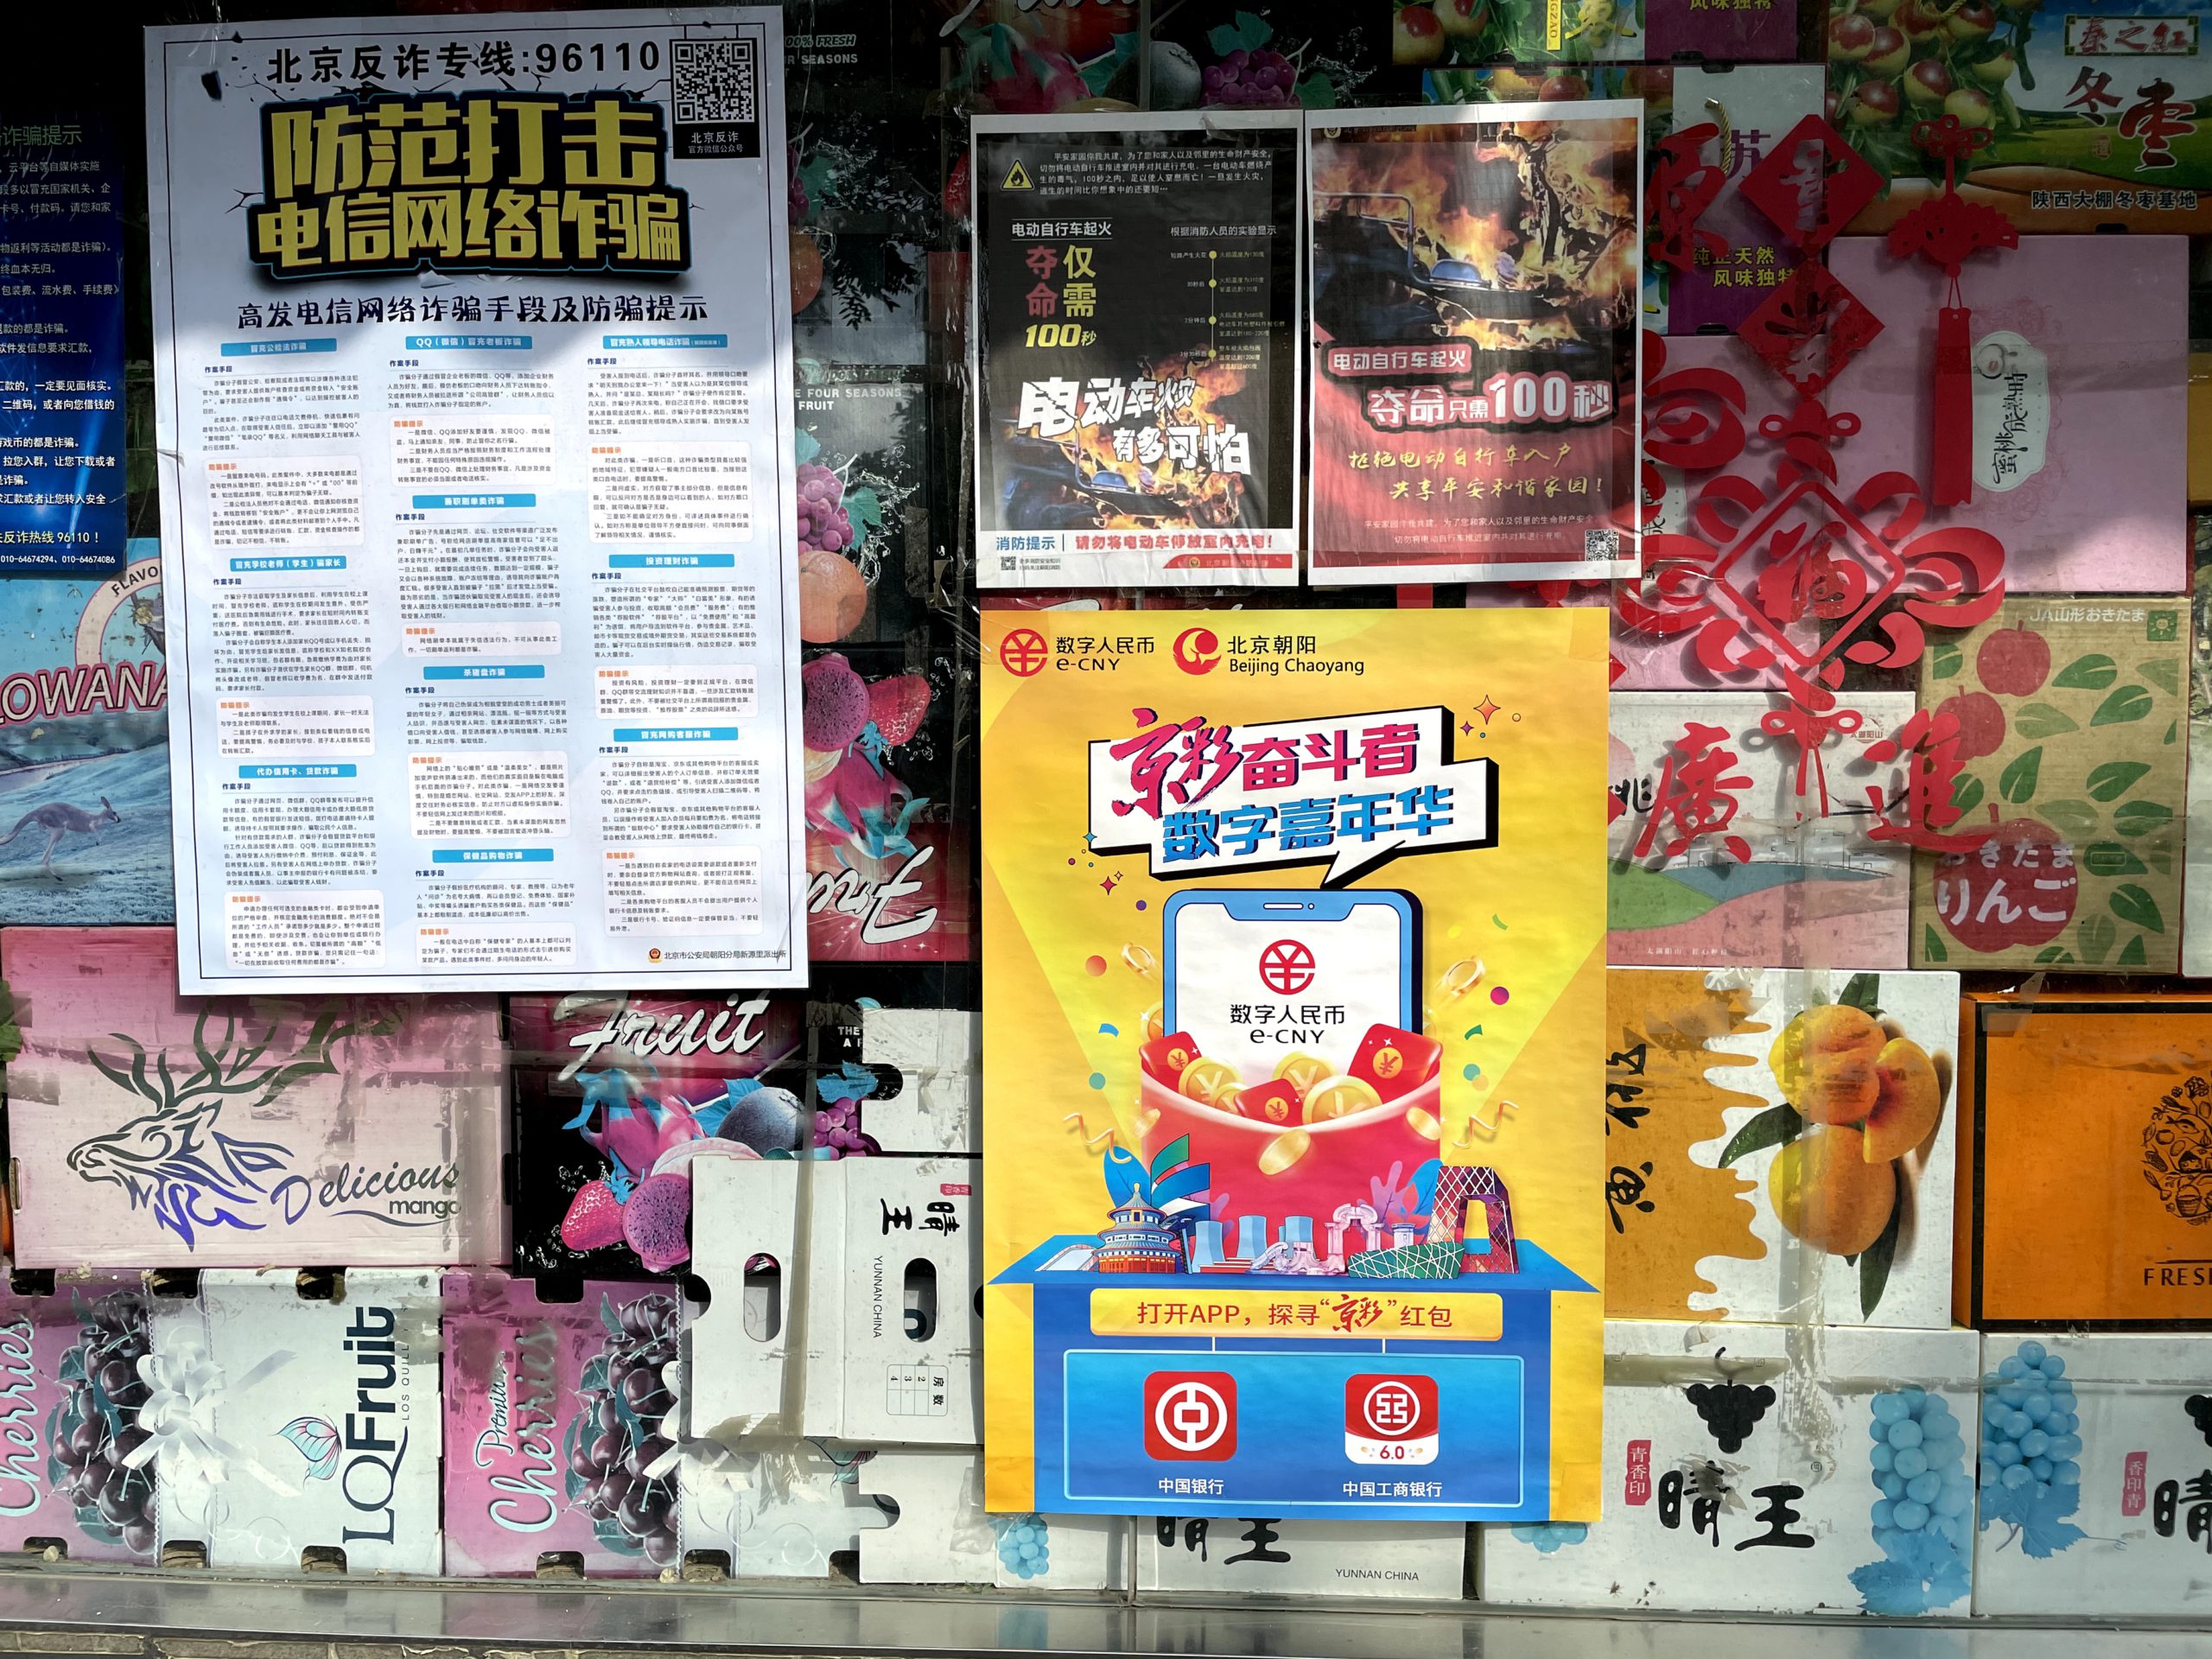 A poster for the digital yuan lottery in June is still posted outside Sanyuanli wet market. Photo by KrASIA.